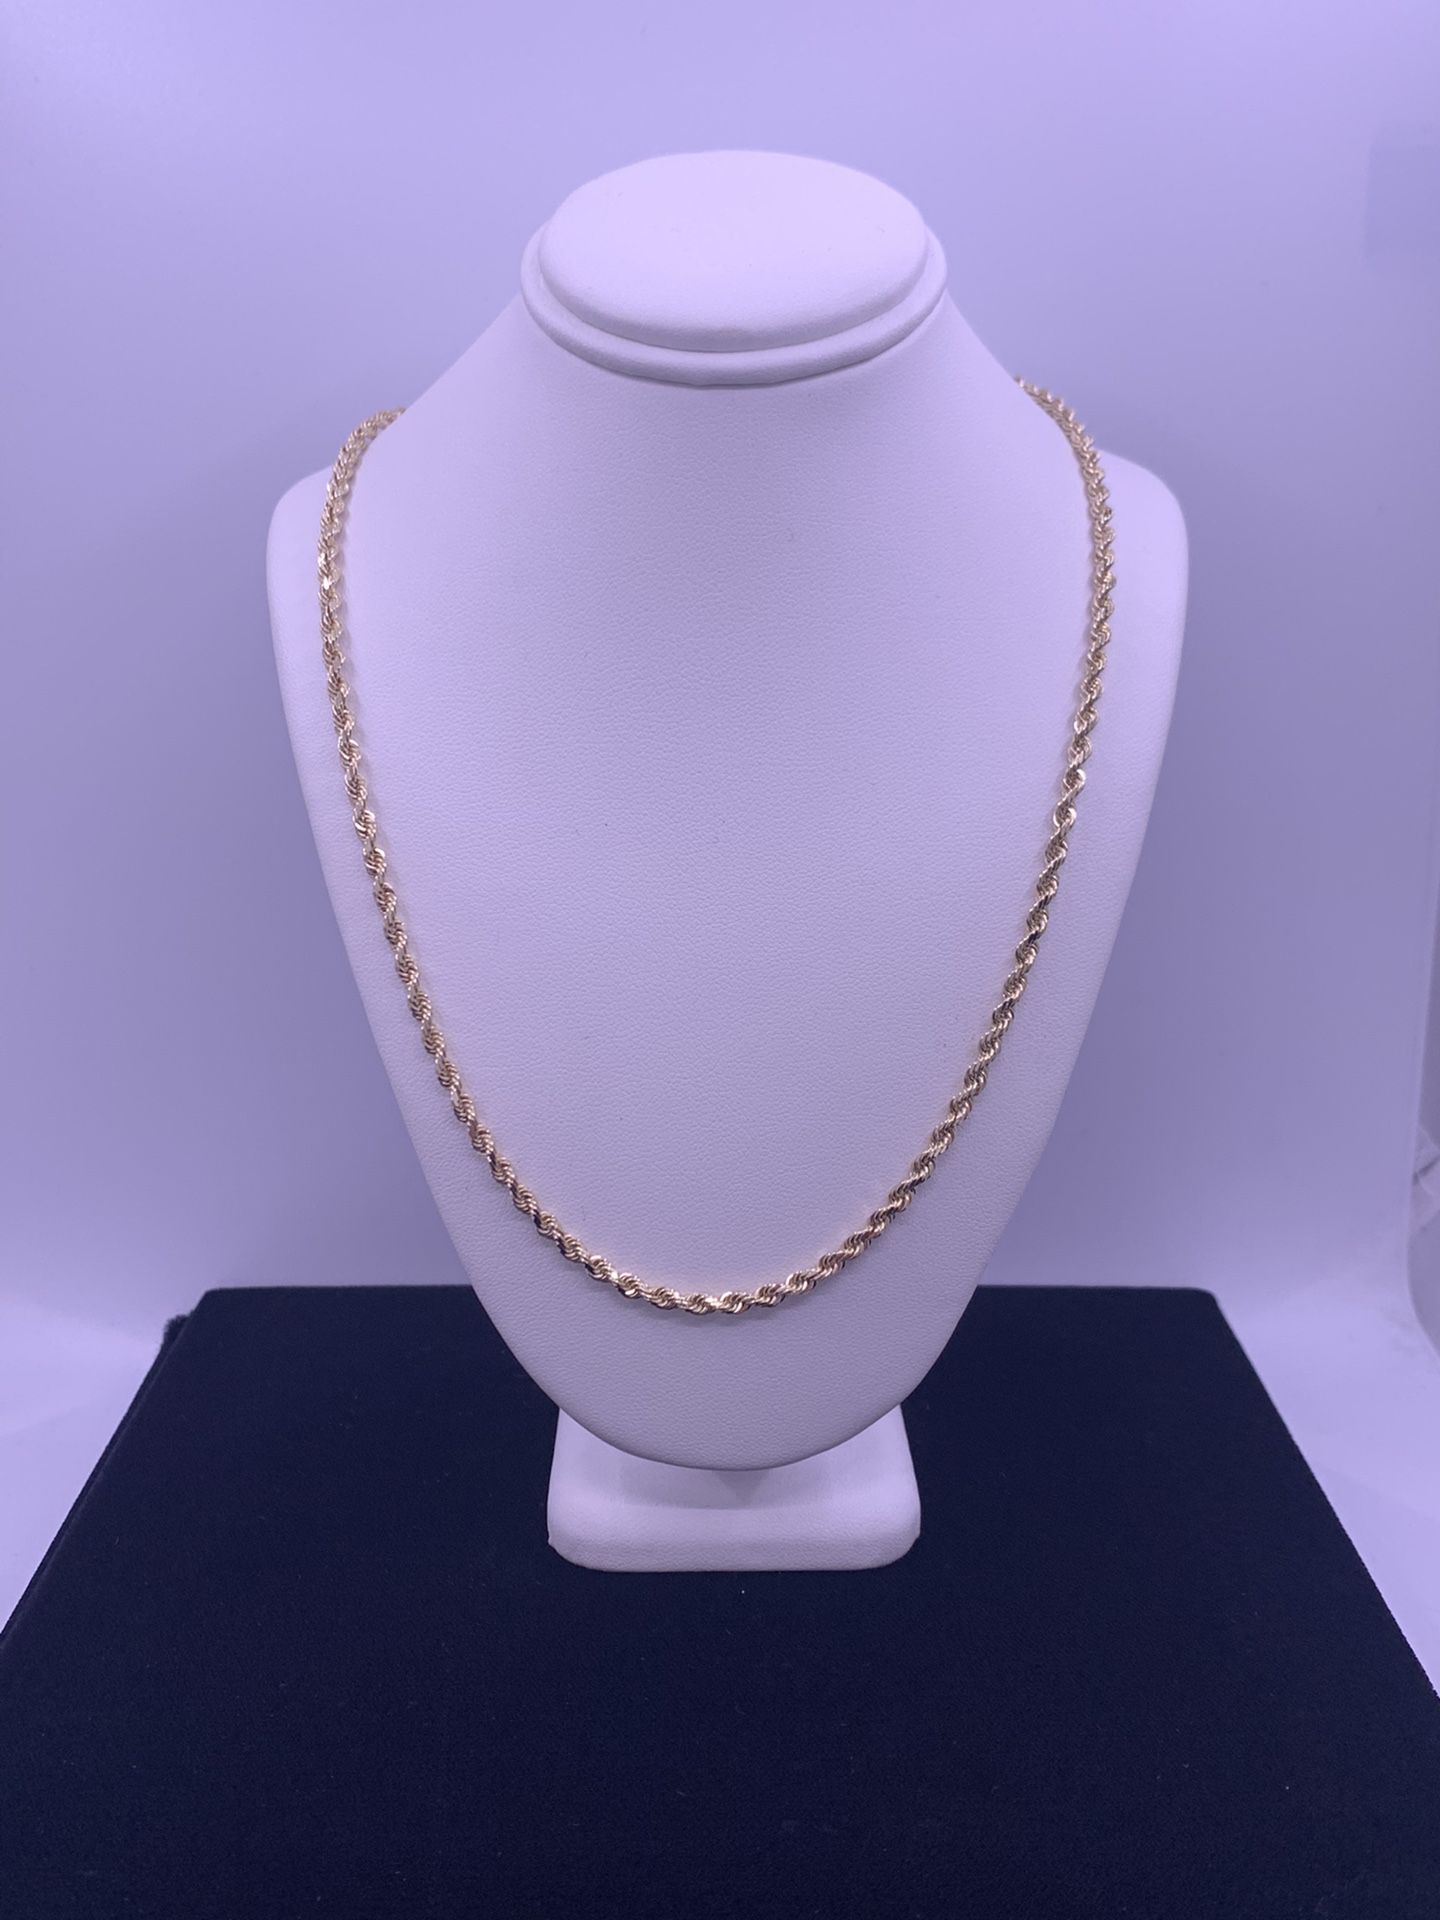 Gold Rope Chain 12.4g 14kt 18”